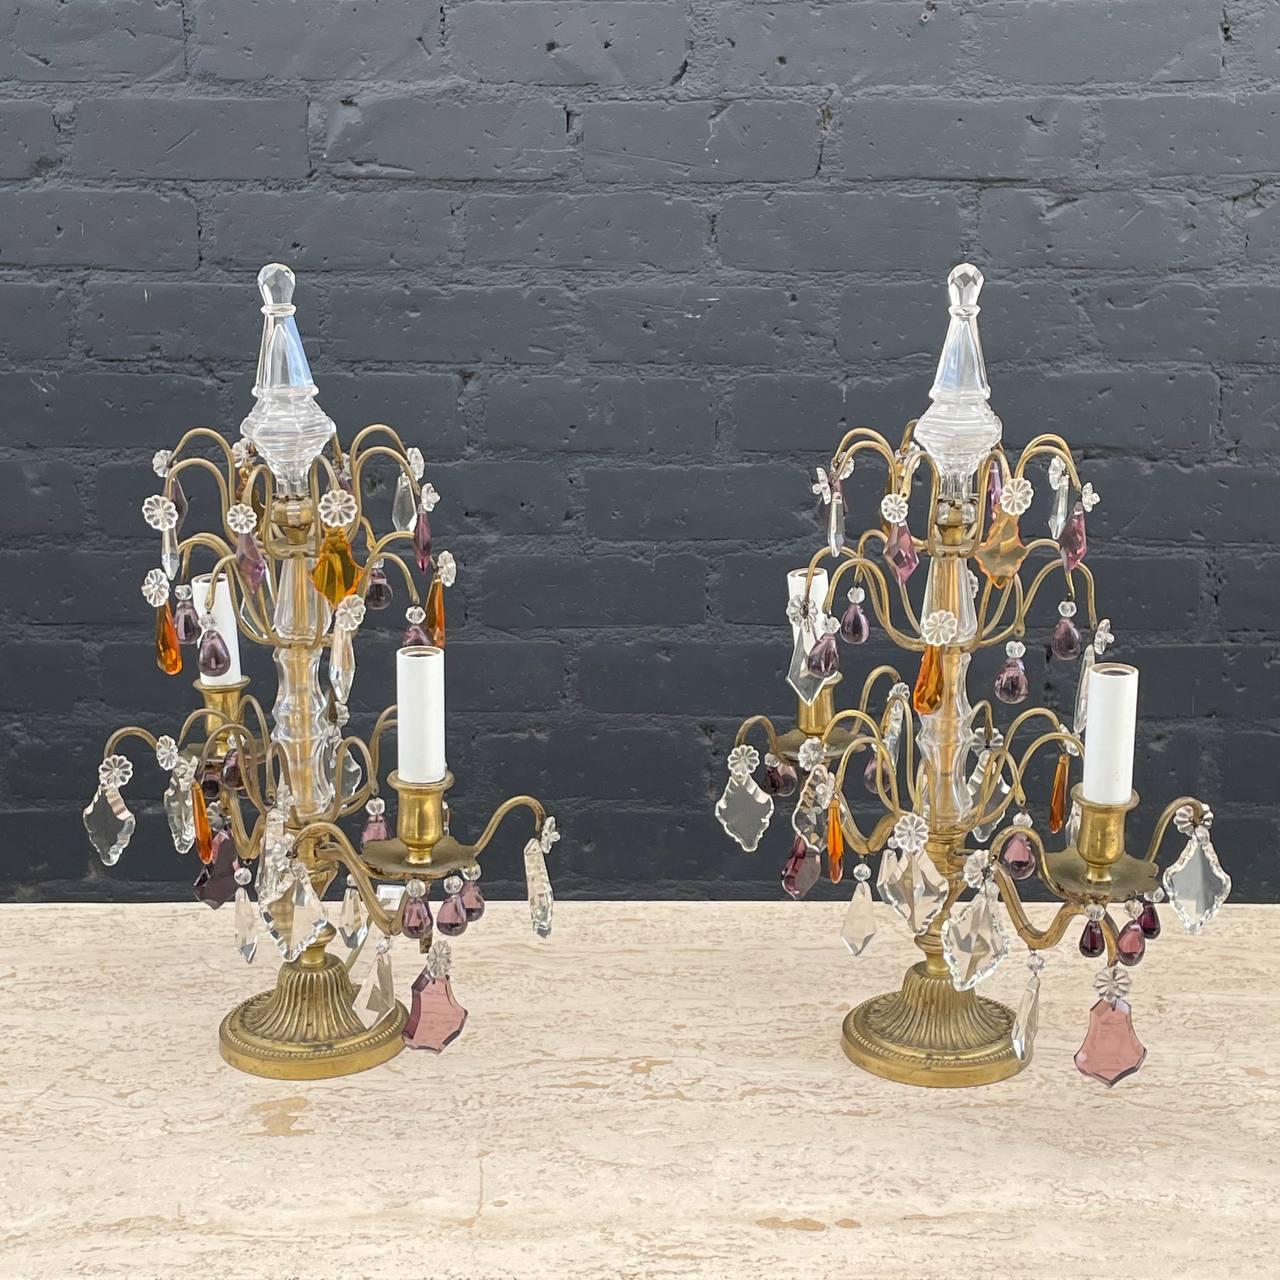 Each girandole features a delicate bronze frame with an assortment of faceted prisms in various shapes , colors and sizes.

Wired and in working condition, each girandole requires 2 candelabra bulbs.

Decorative accent fixtures, perfect for